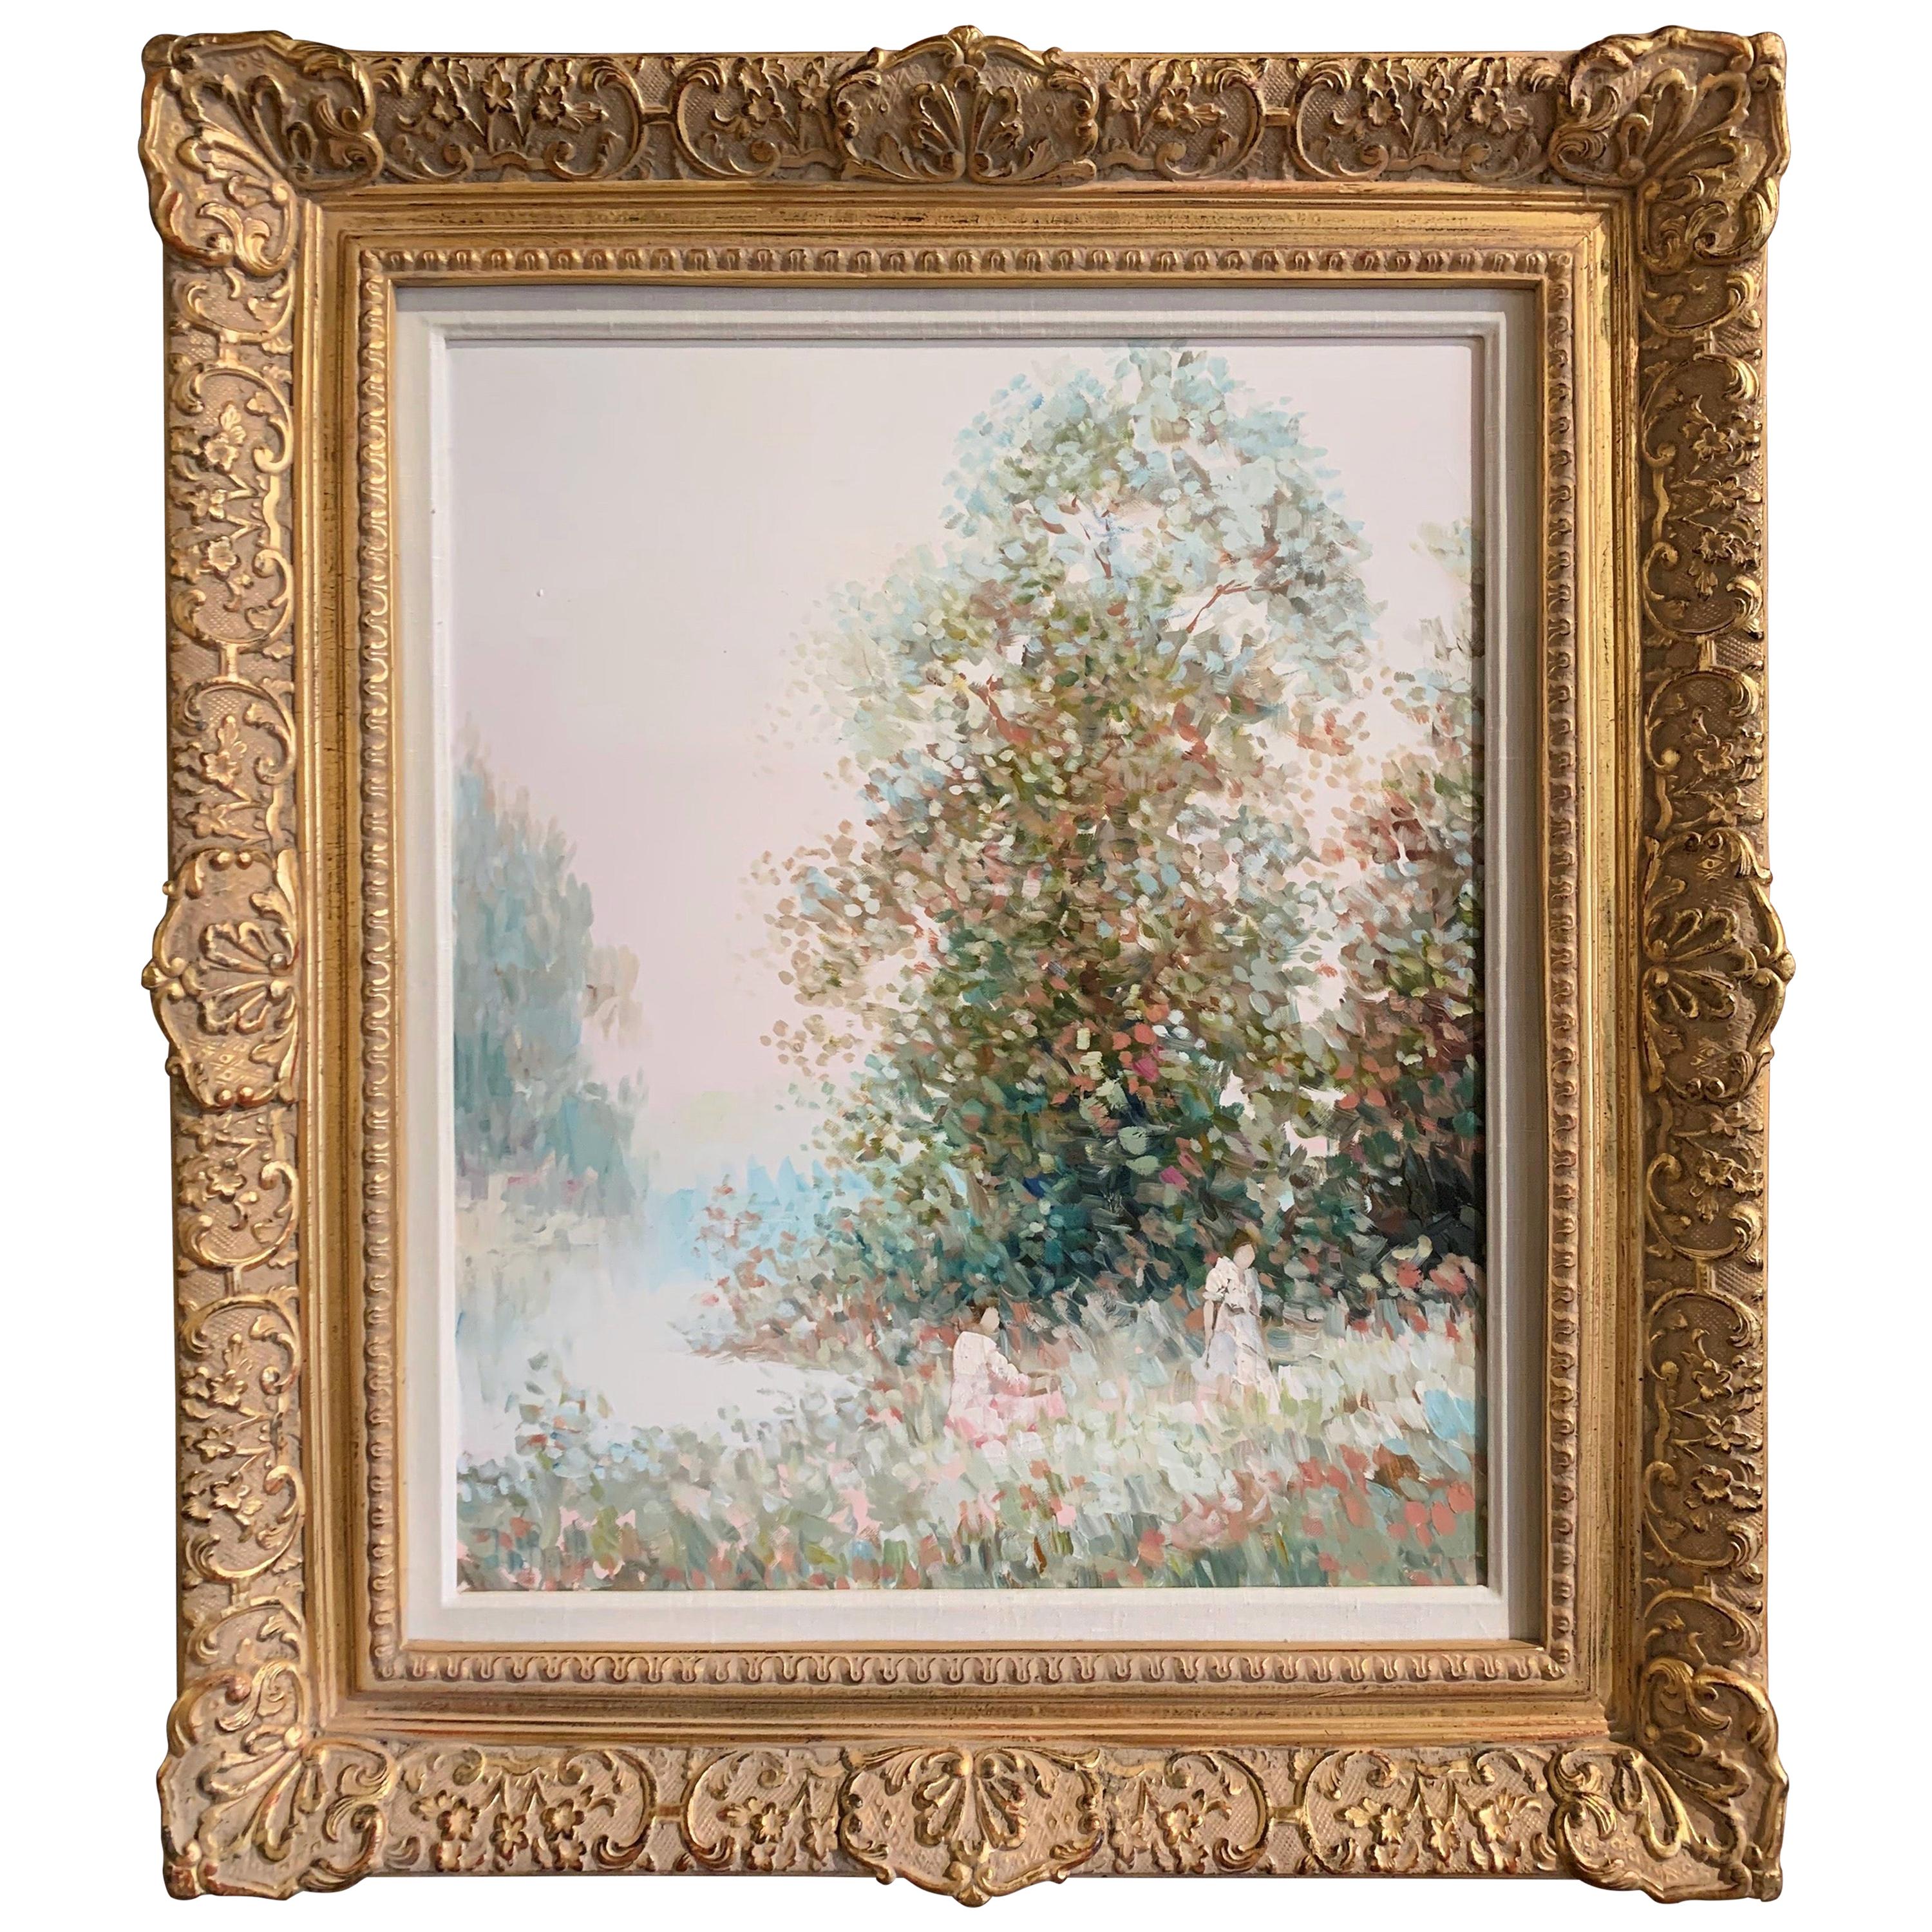 Signed Impressionistic Oil on Canvas Painting in Carved Gilt Frame